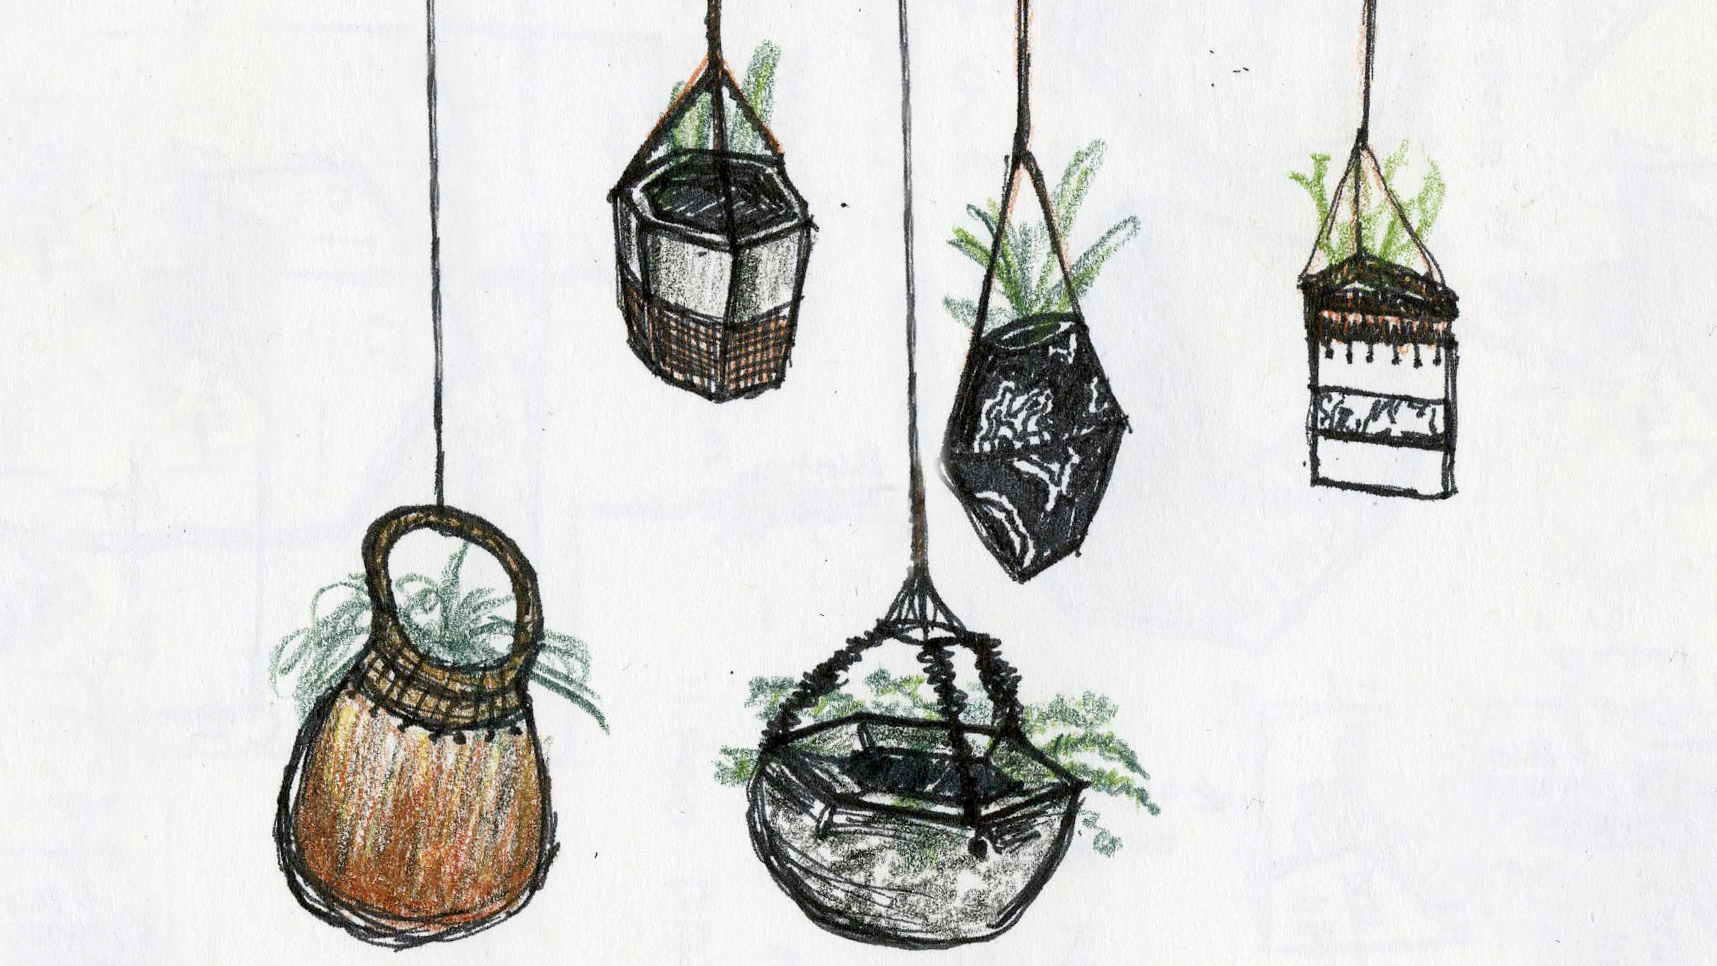  Original idea generation sketches for the verge and terra planters. 